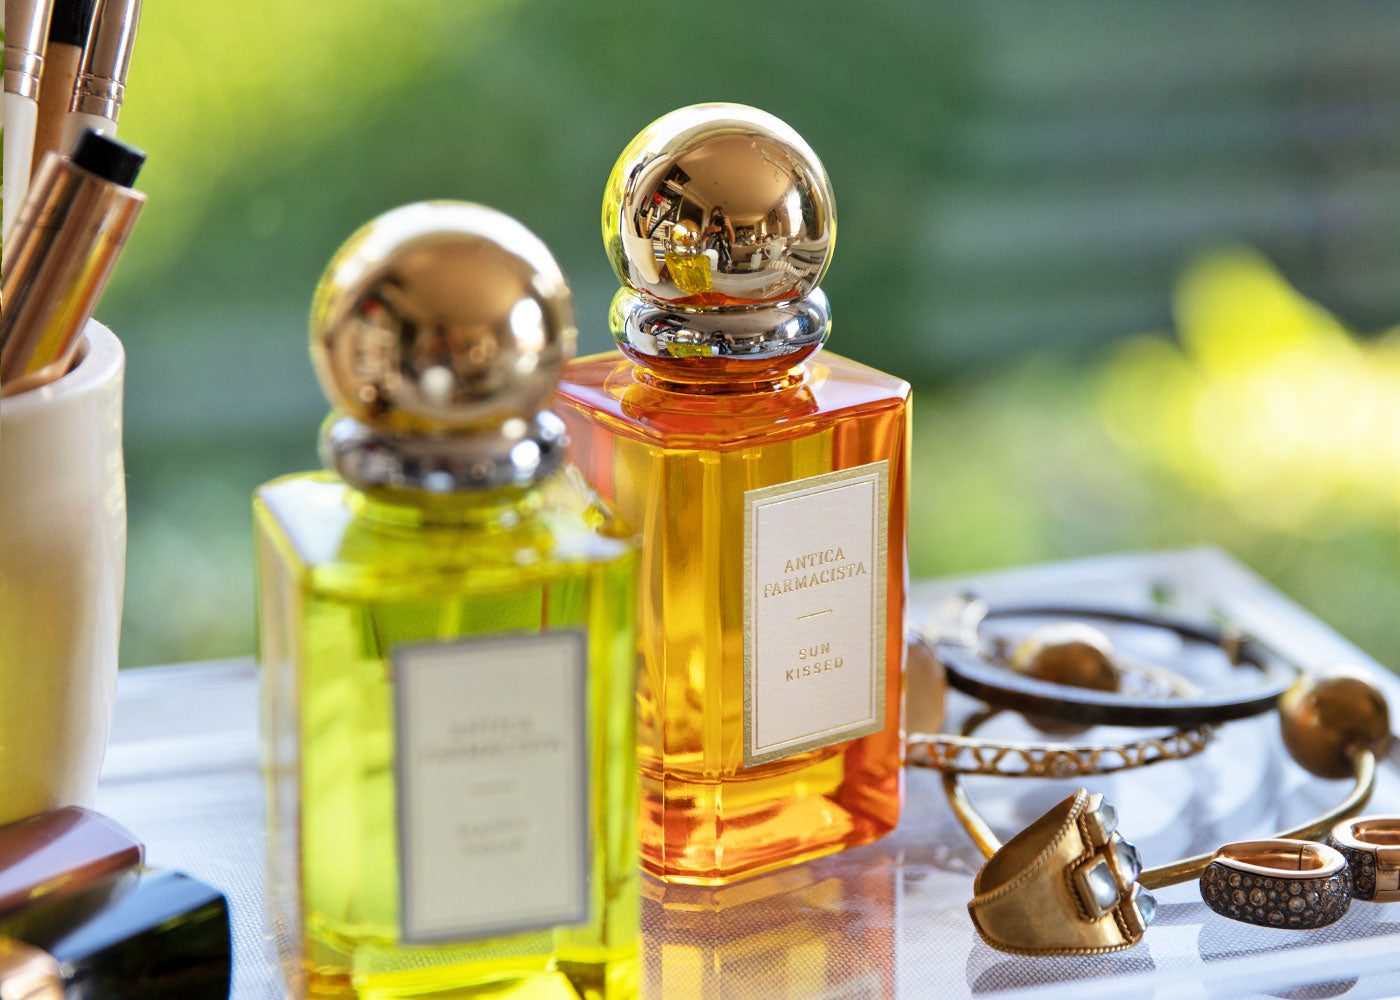 A Guide to Finding Your Signature Scent